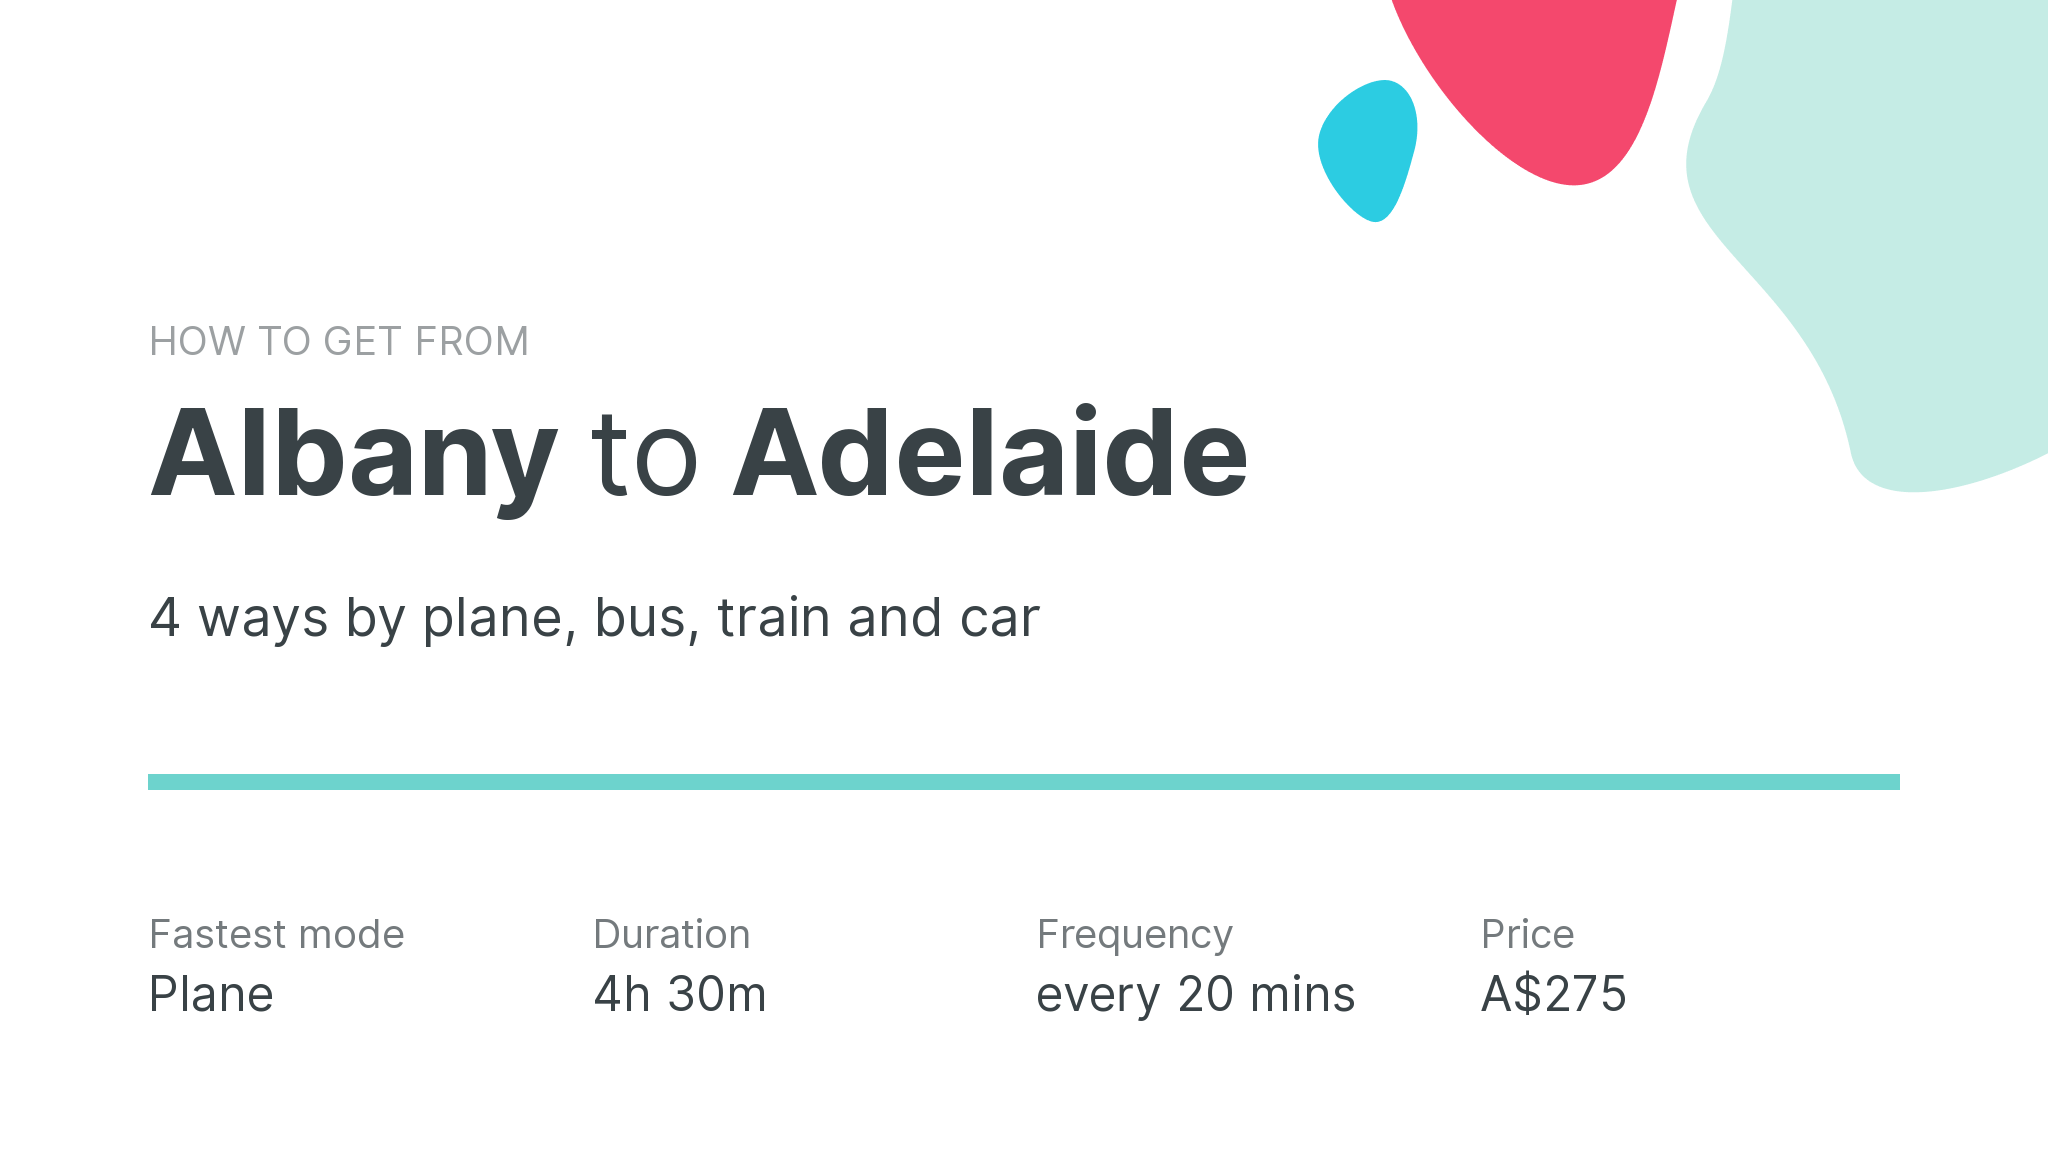 How do I get from Albany to Adelaide